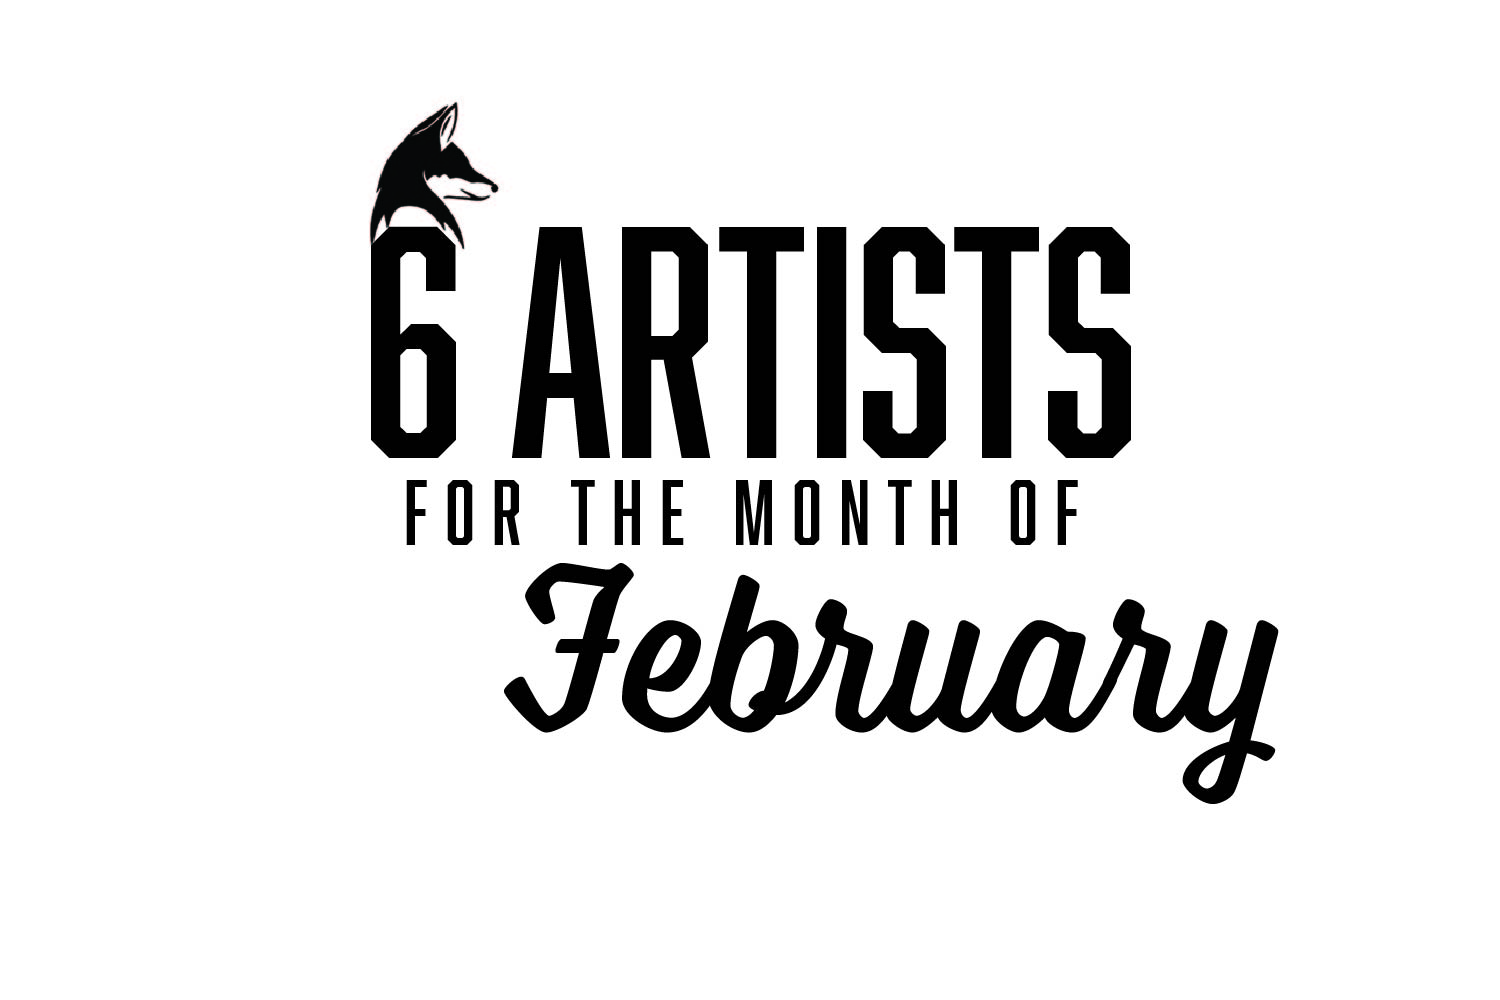 SIX ARTISTS YOU SHOULD BE LISTENING TO: FEBRUARY 2023